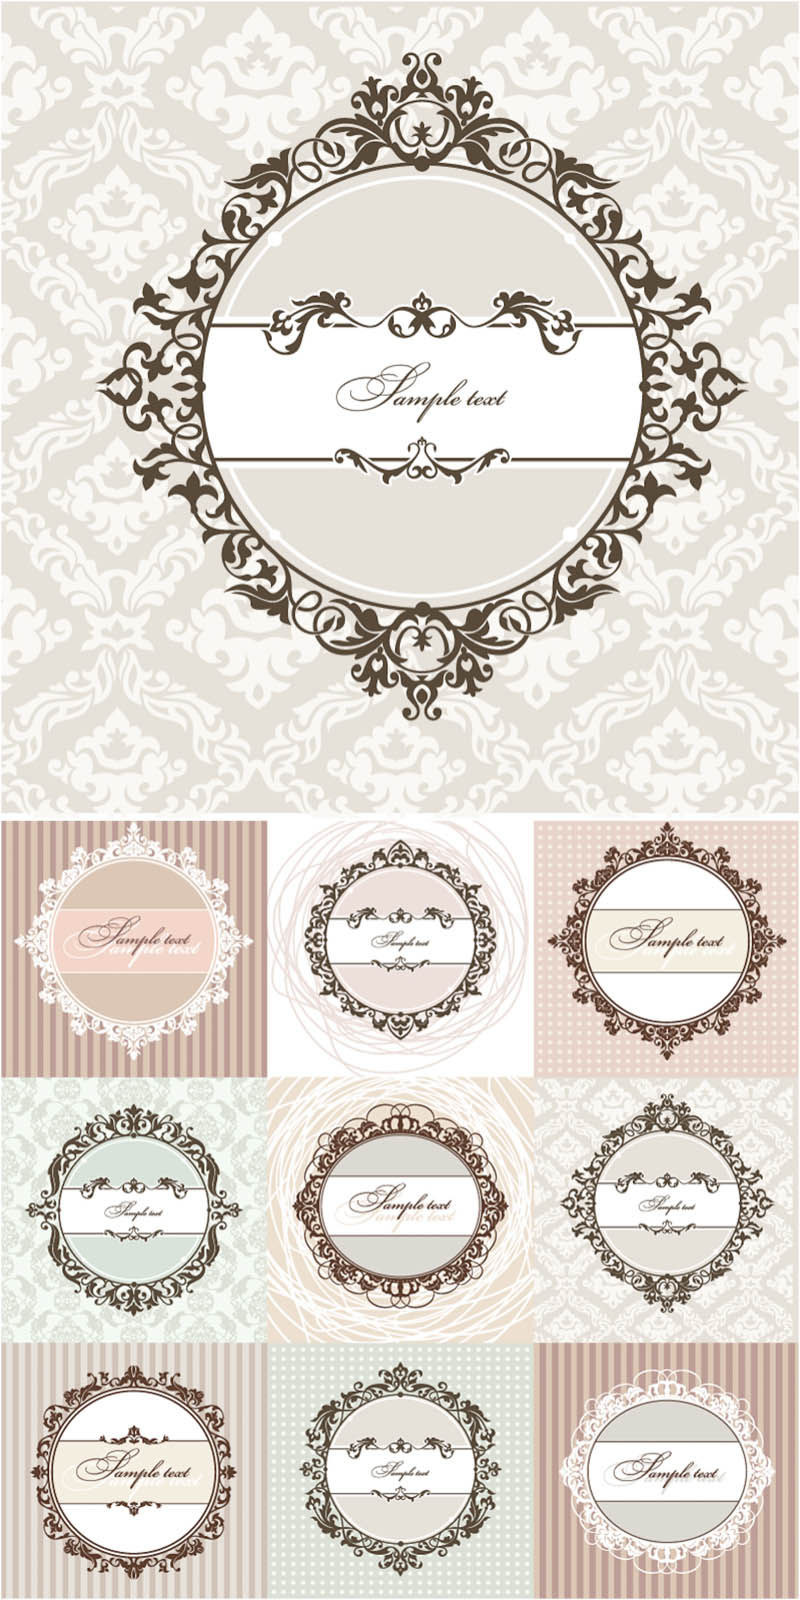 9 Photos of Vintage Floral Frame Vector Free